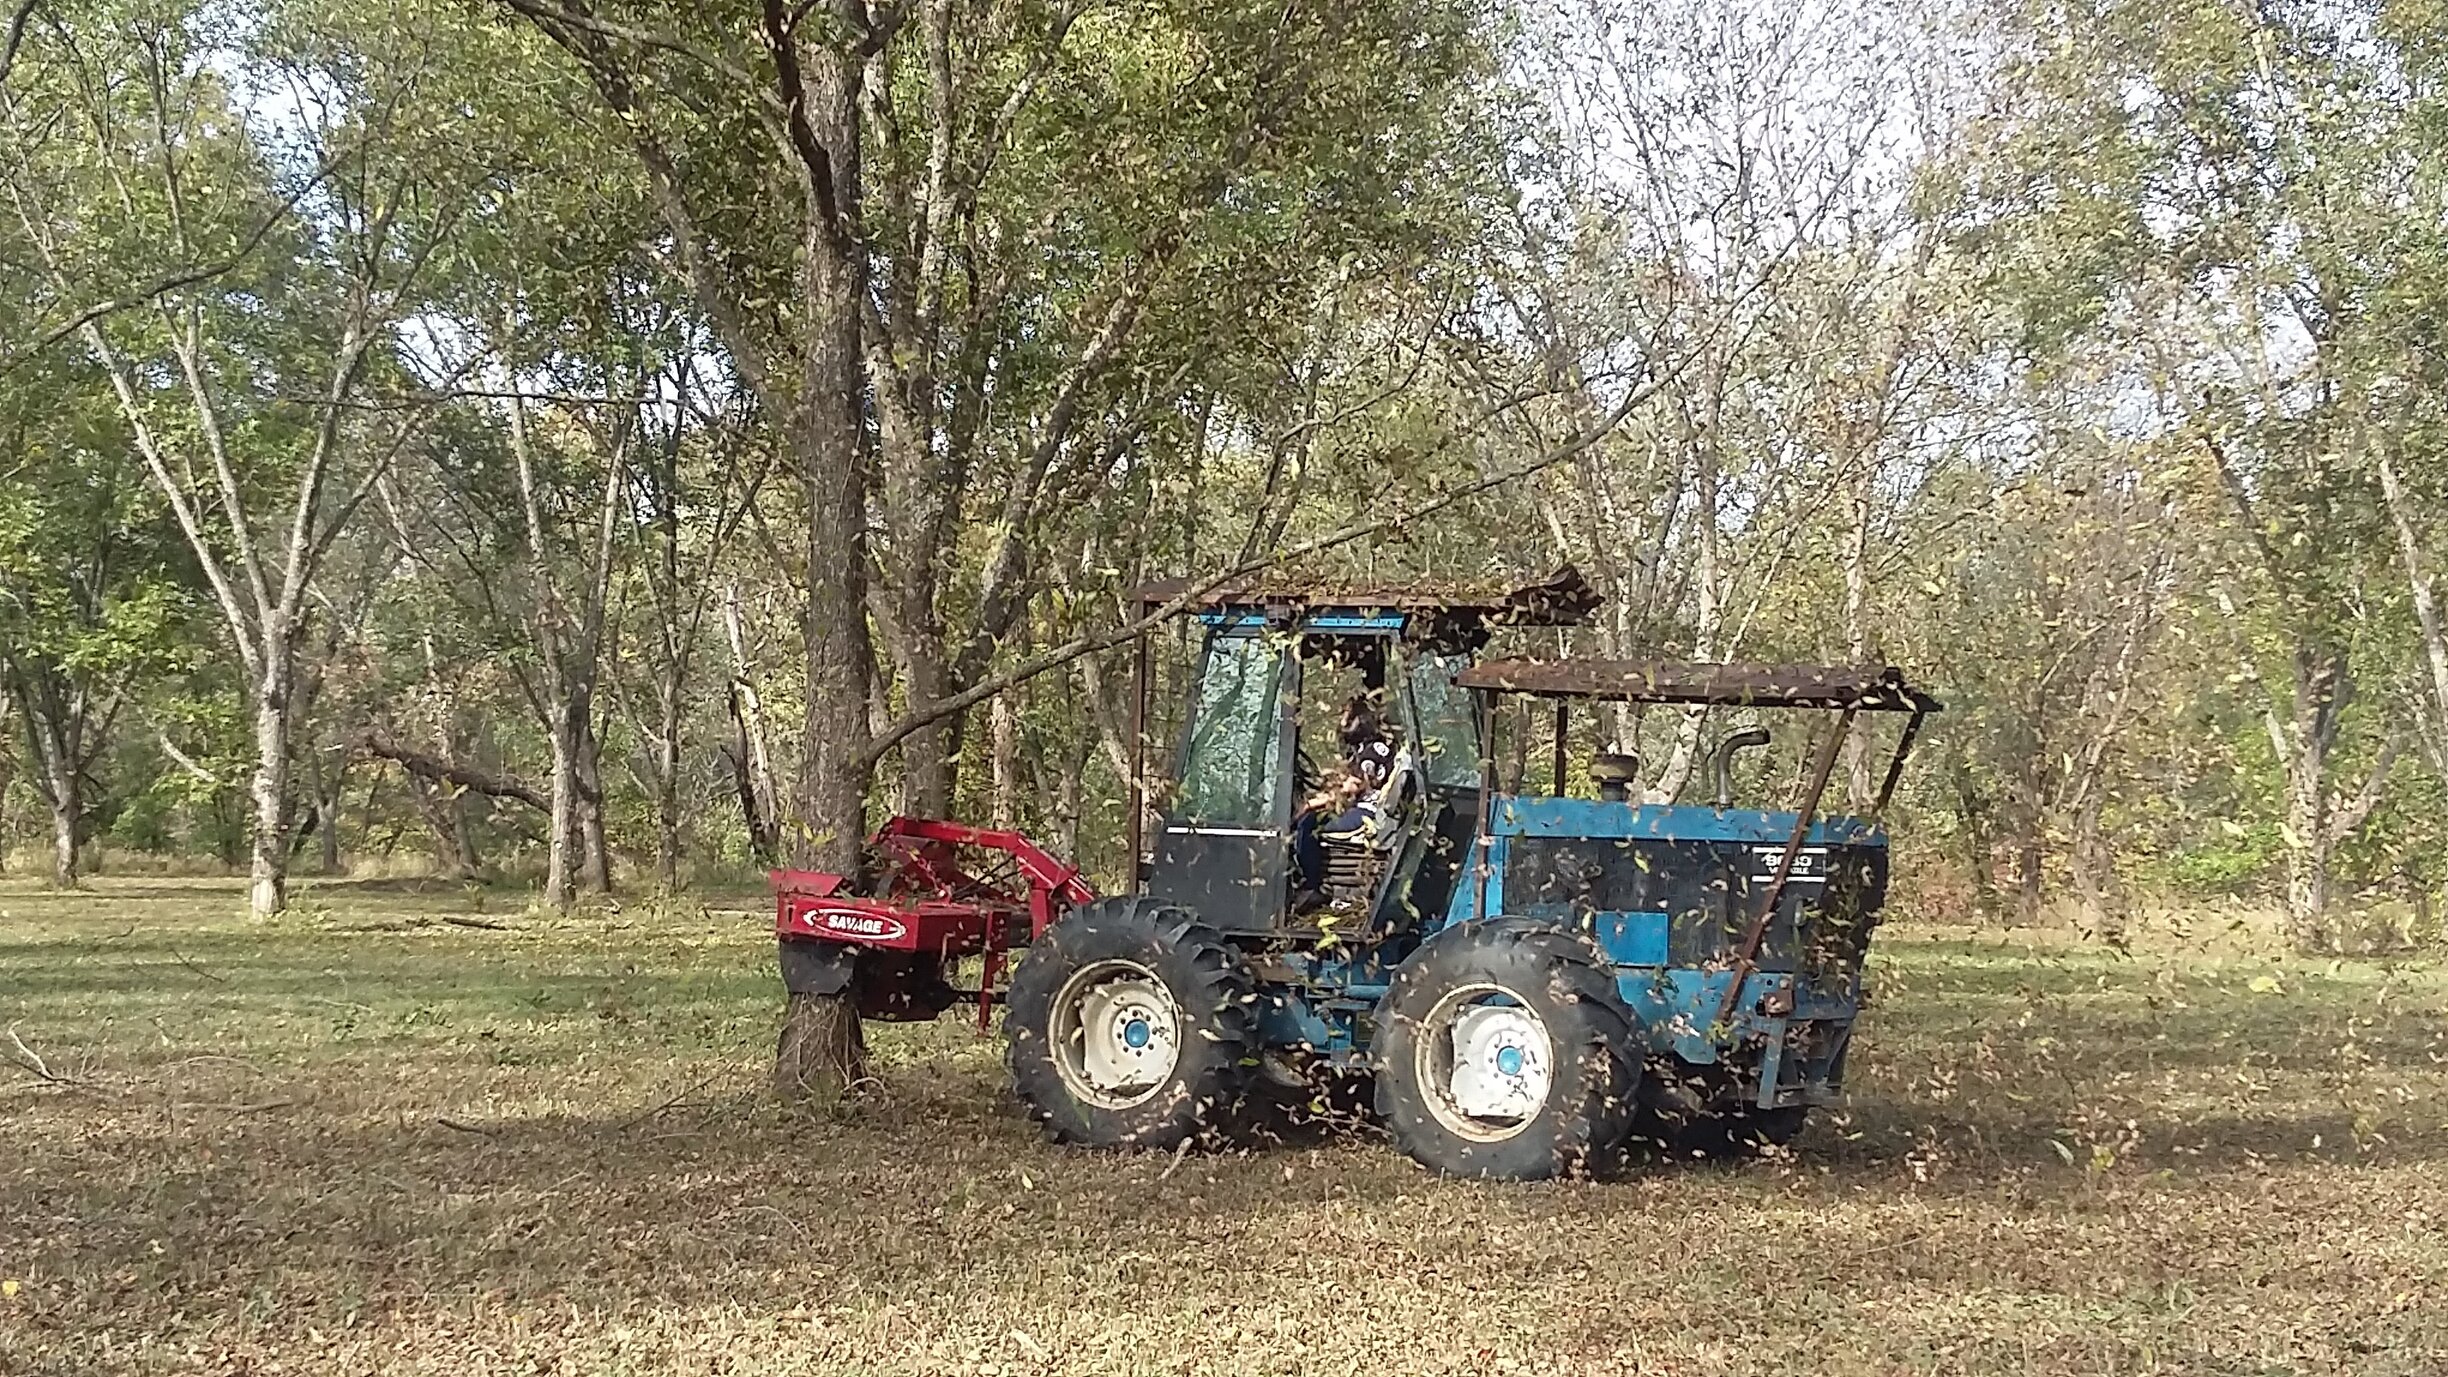 Pecan trees being processed